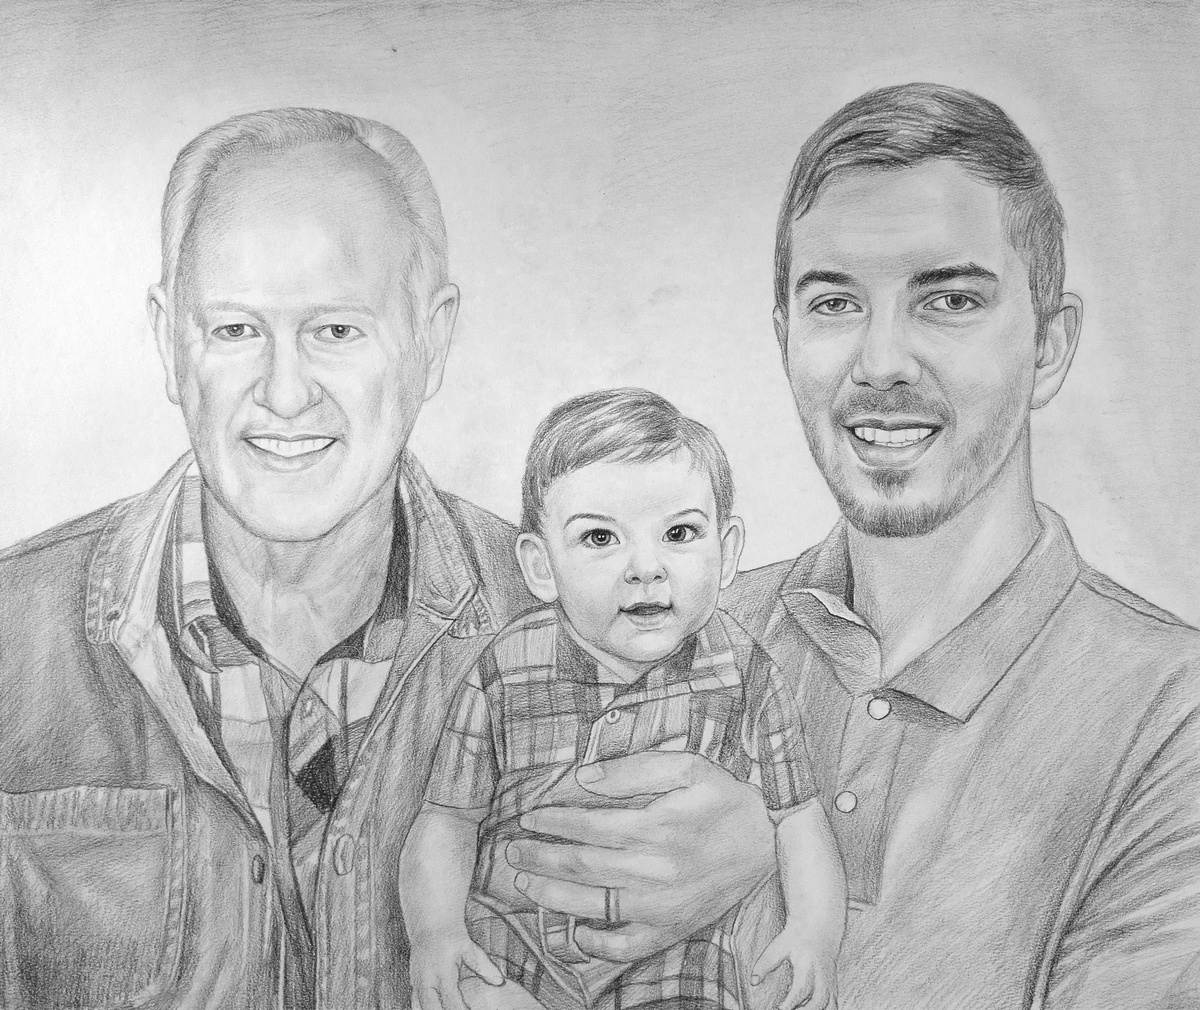 A pencil sketchy style artwork capturing an older man and a baby, perfect for Father's Day.